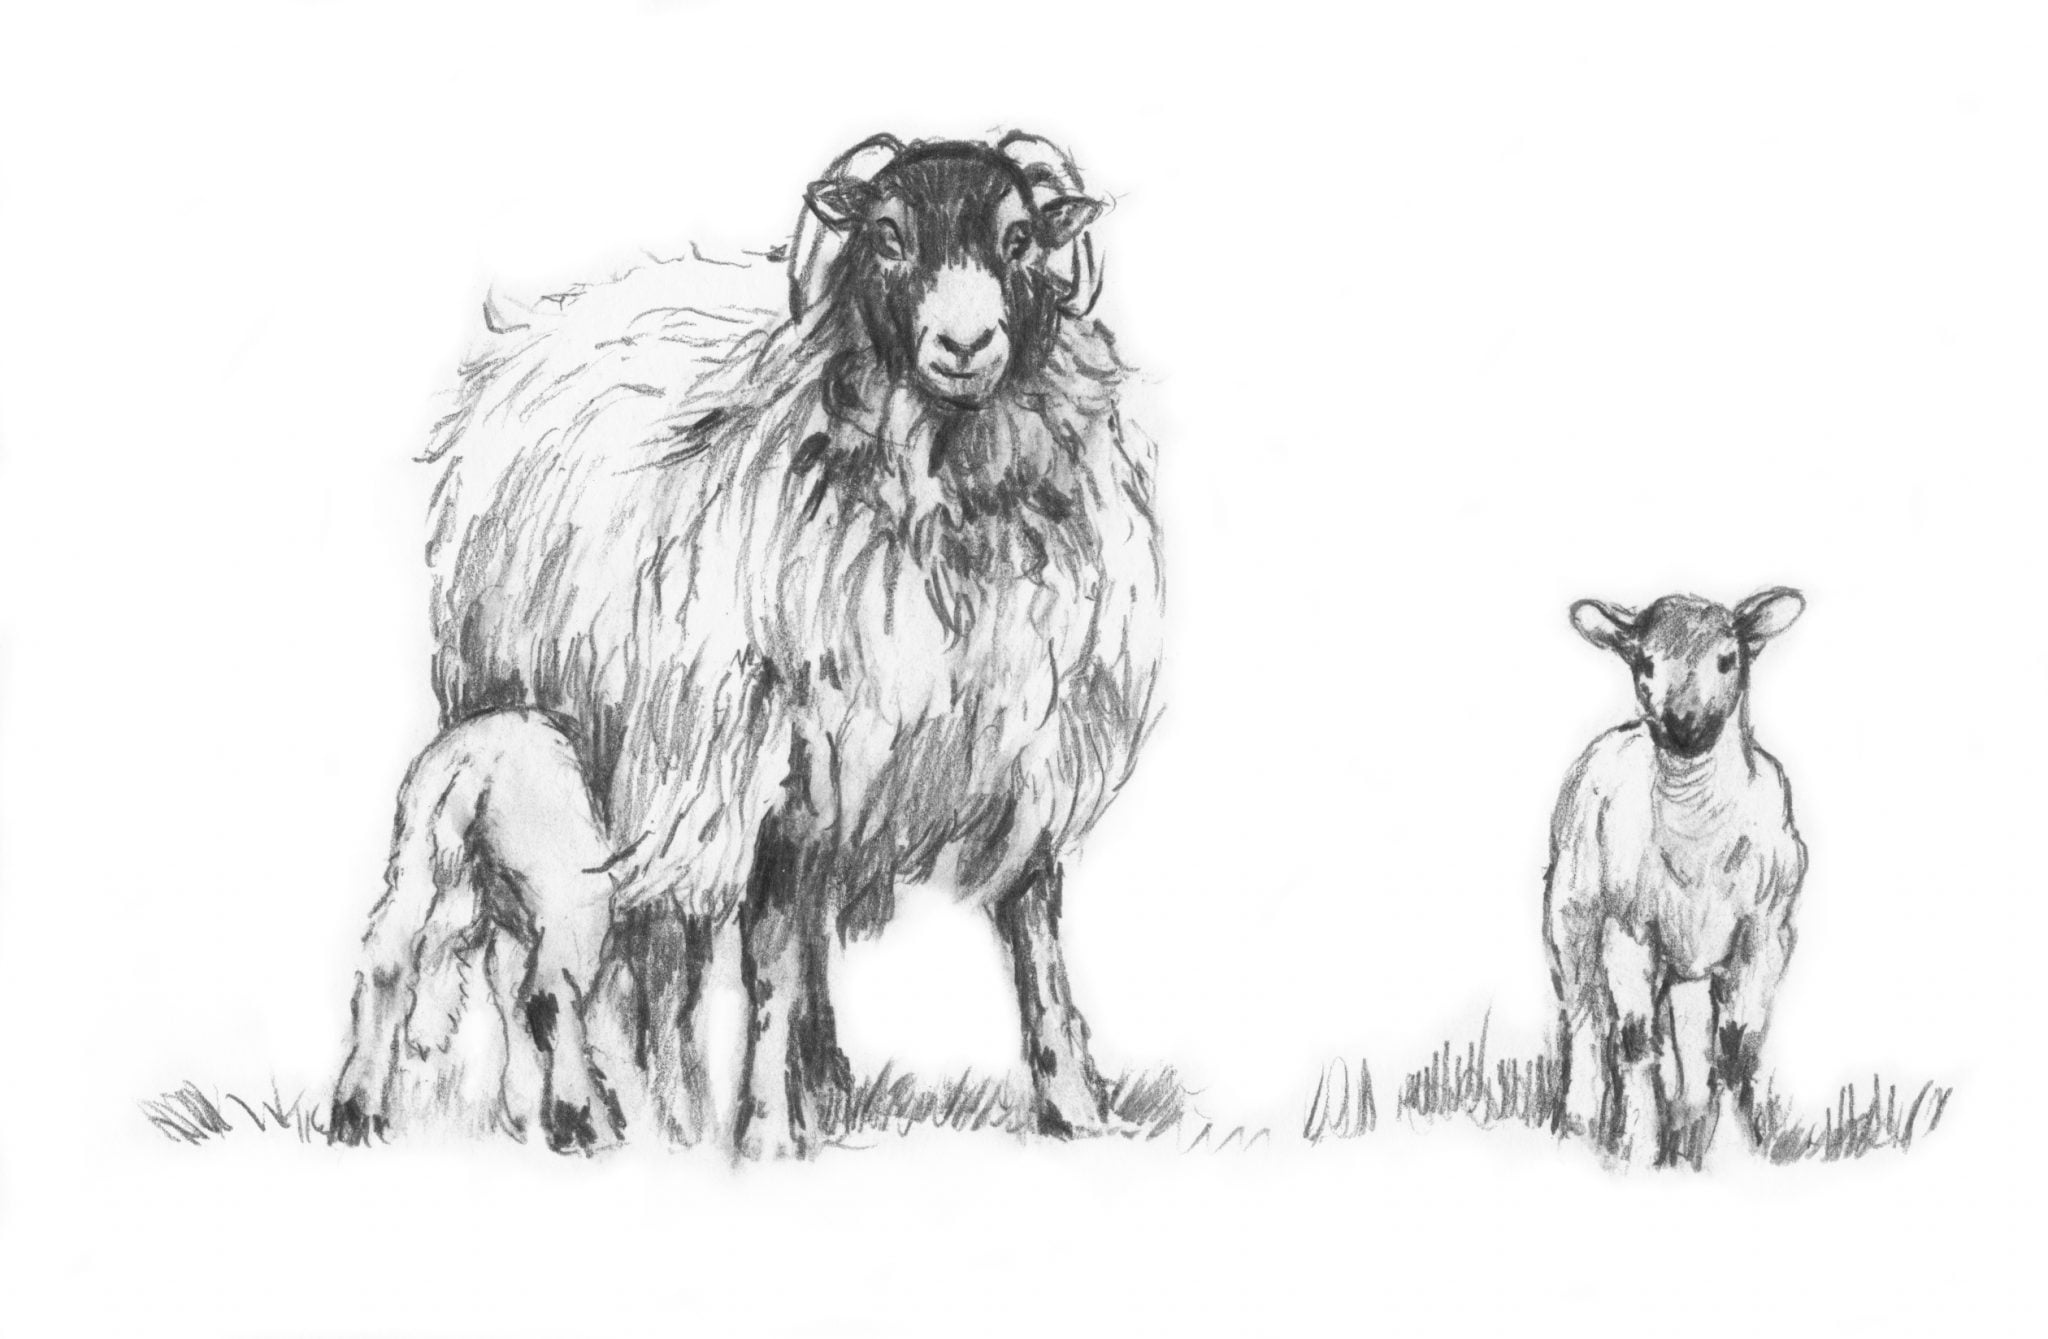 Pictures of Sheep by Diana Rosemary Lodge